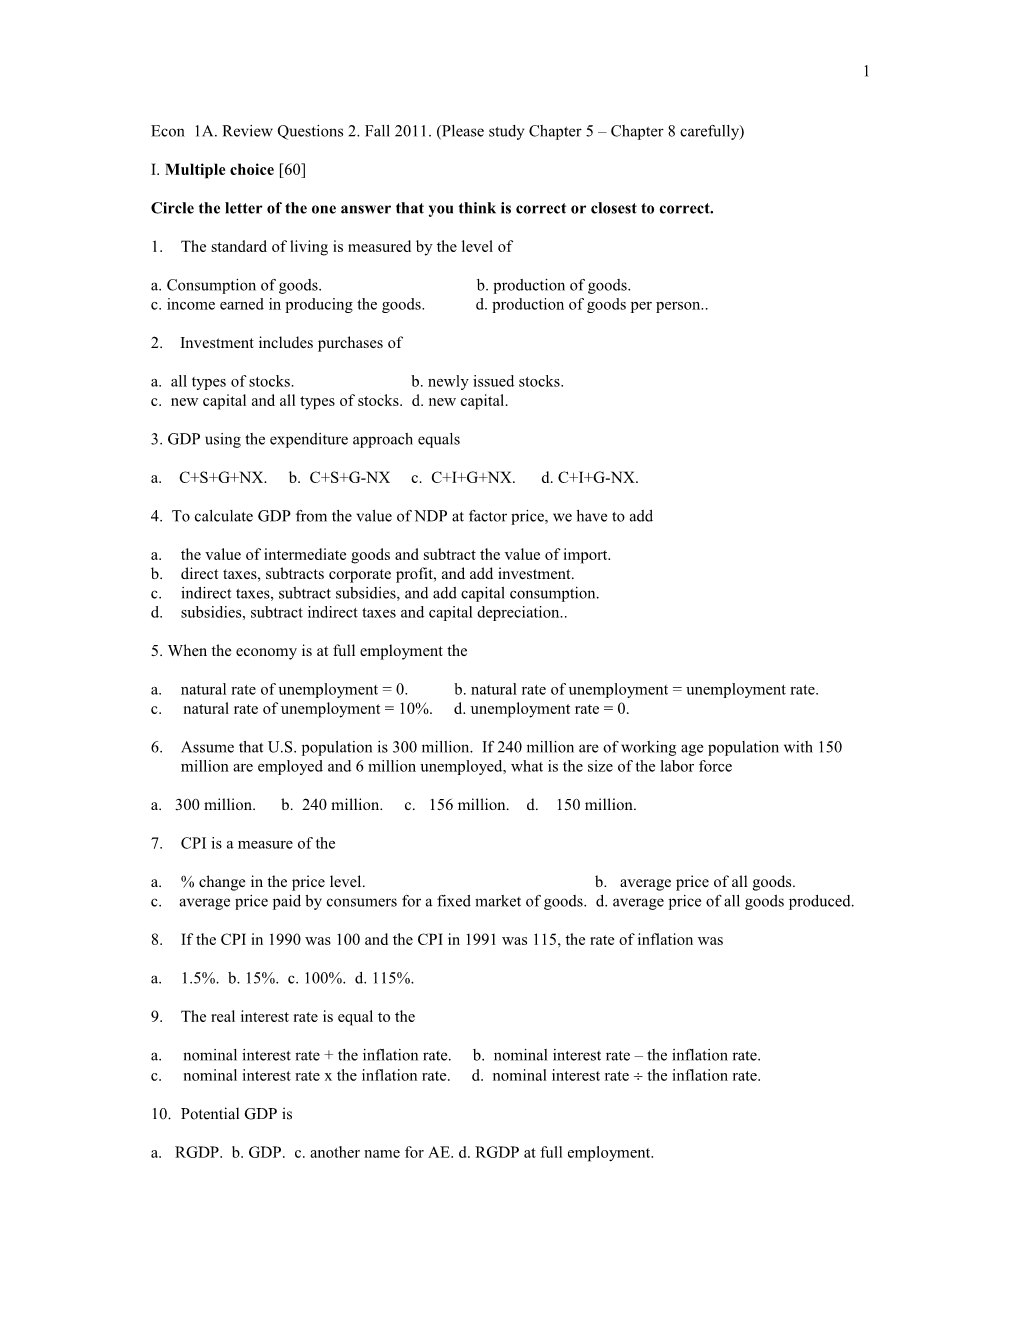 Econ 1A. Review Questions 2. Fall 2011. (Please Study Chapter 5 Chapter 8 Carefully)